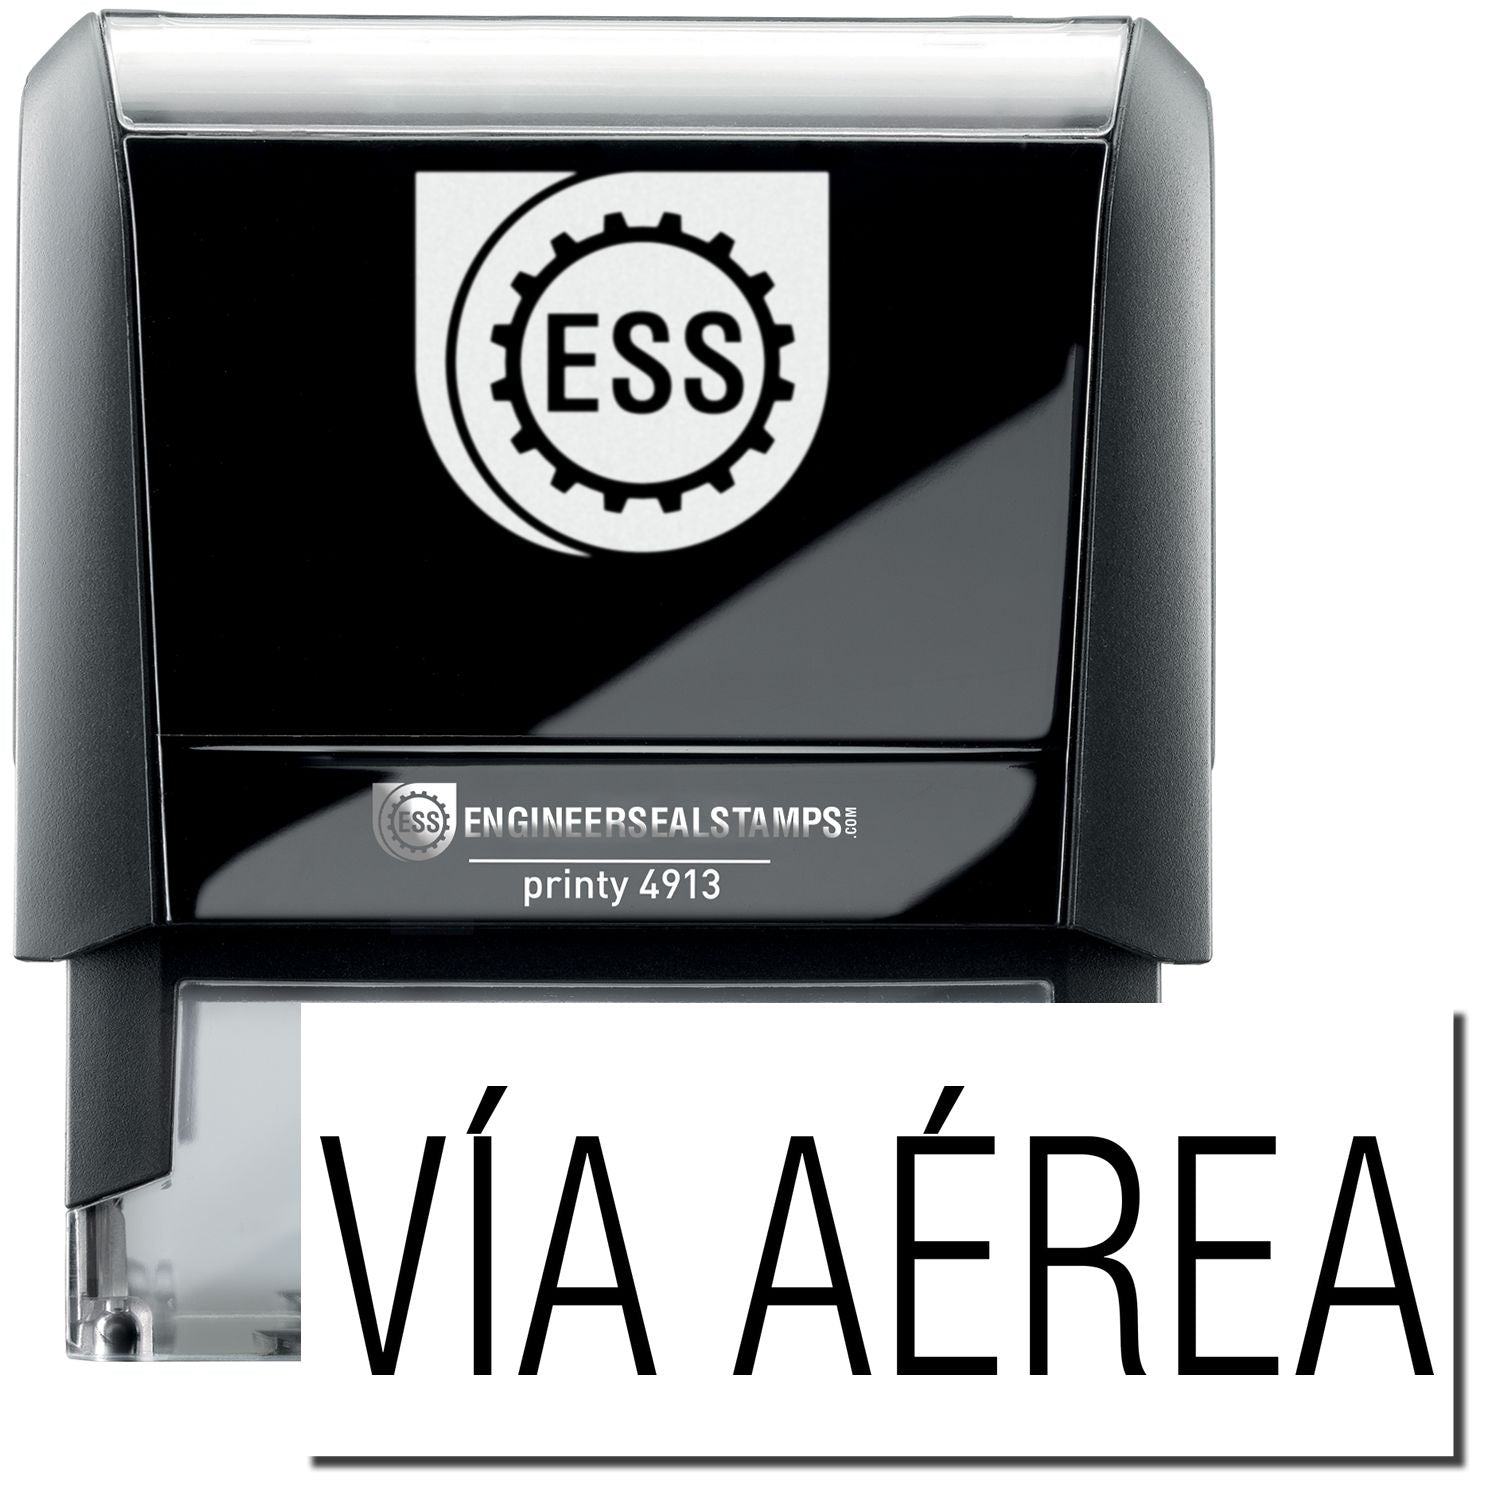 A self-inking stamp with a stamped image showing how the text "VIA AEREA" in a large font is displayed by it after stamping.